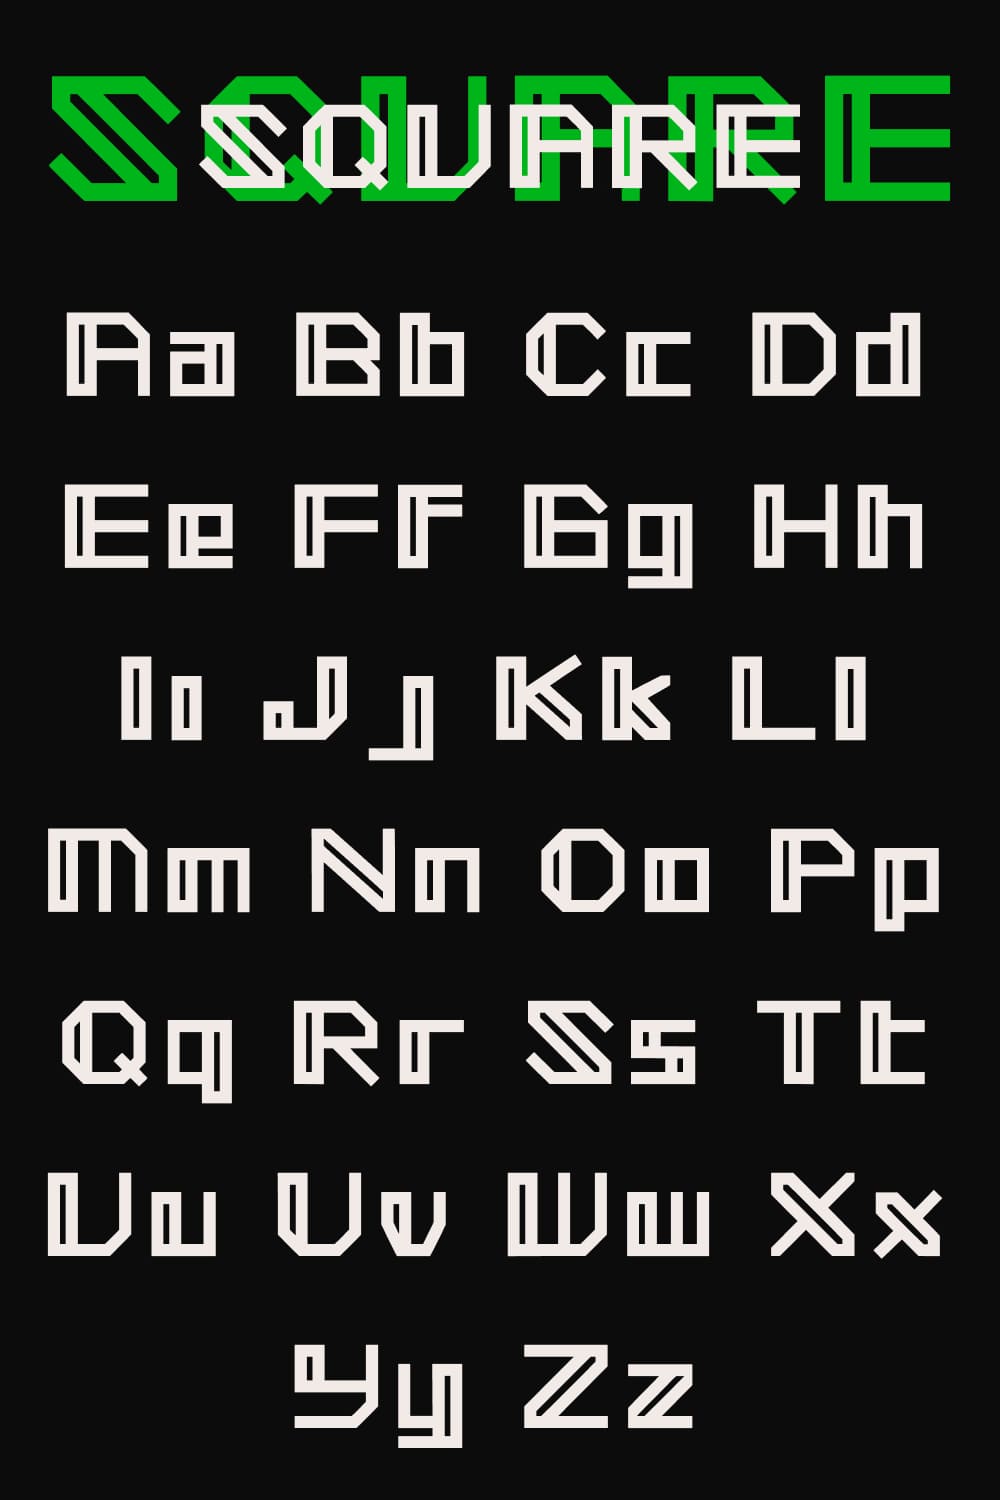 The entire alphabet is provided in the style of this font.